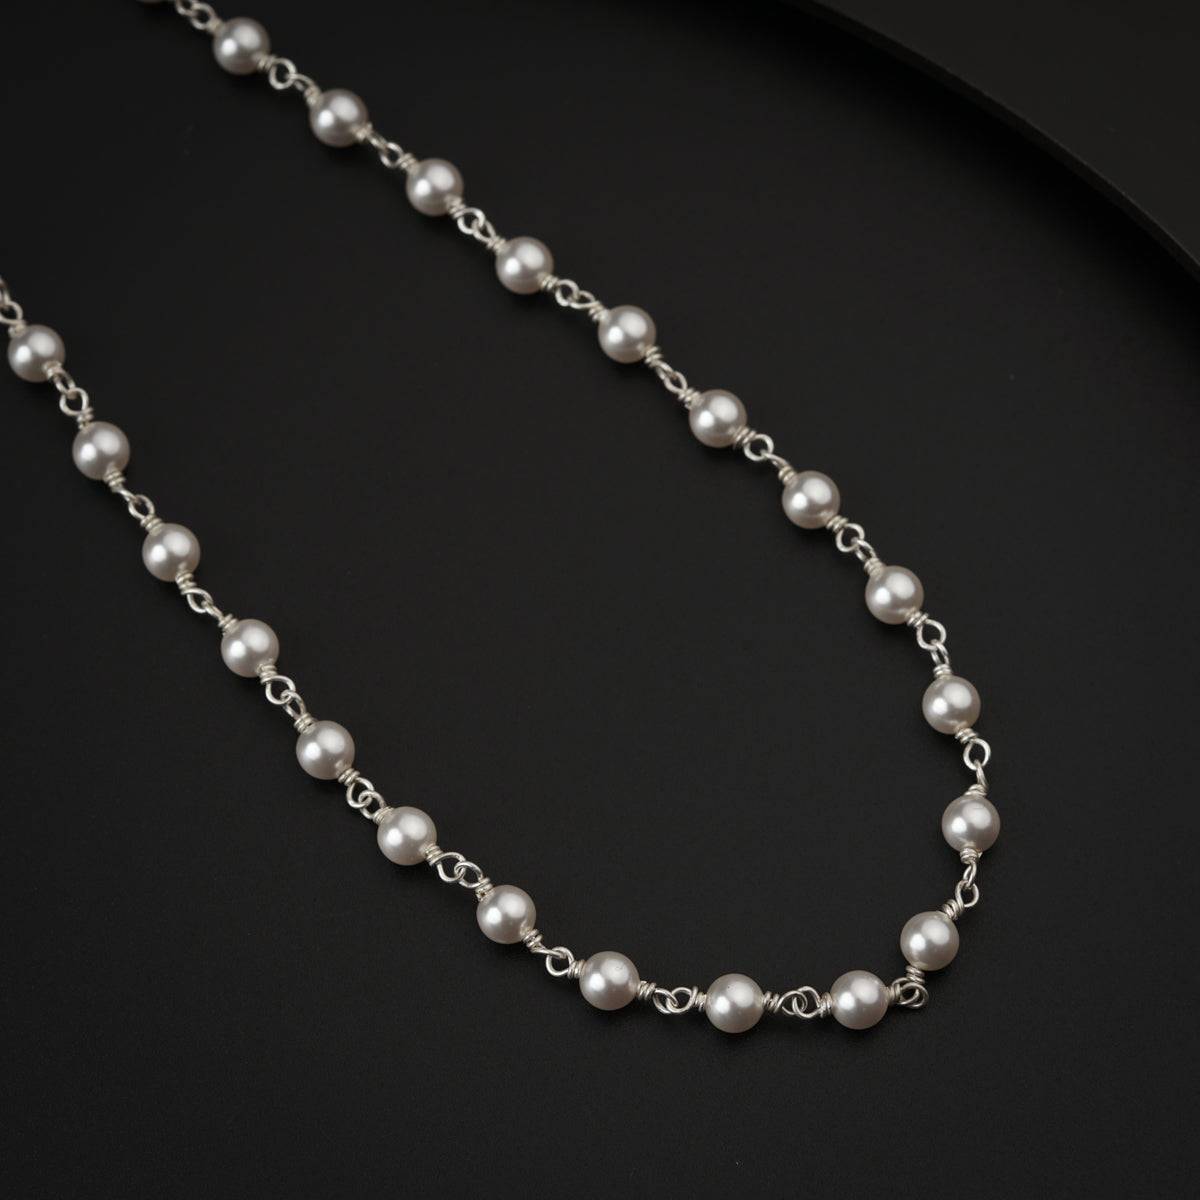 Silver Necklace with Pearls